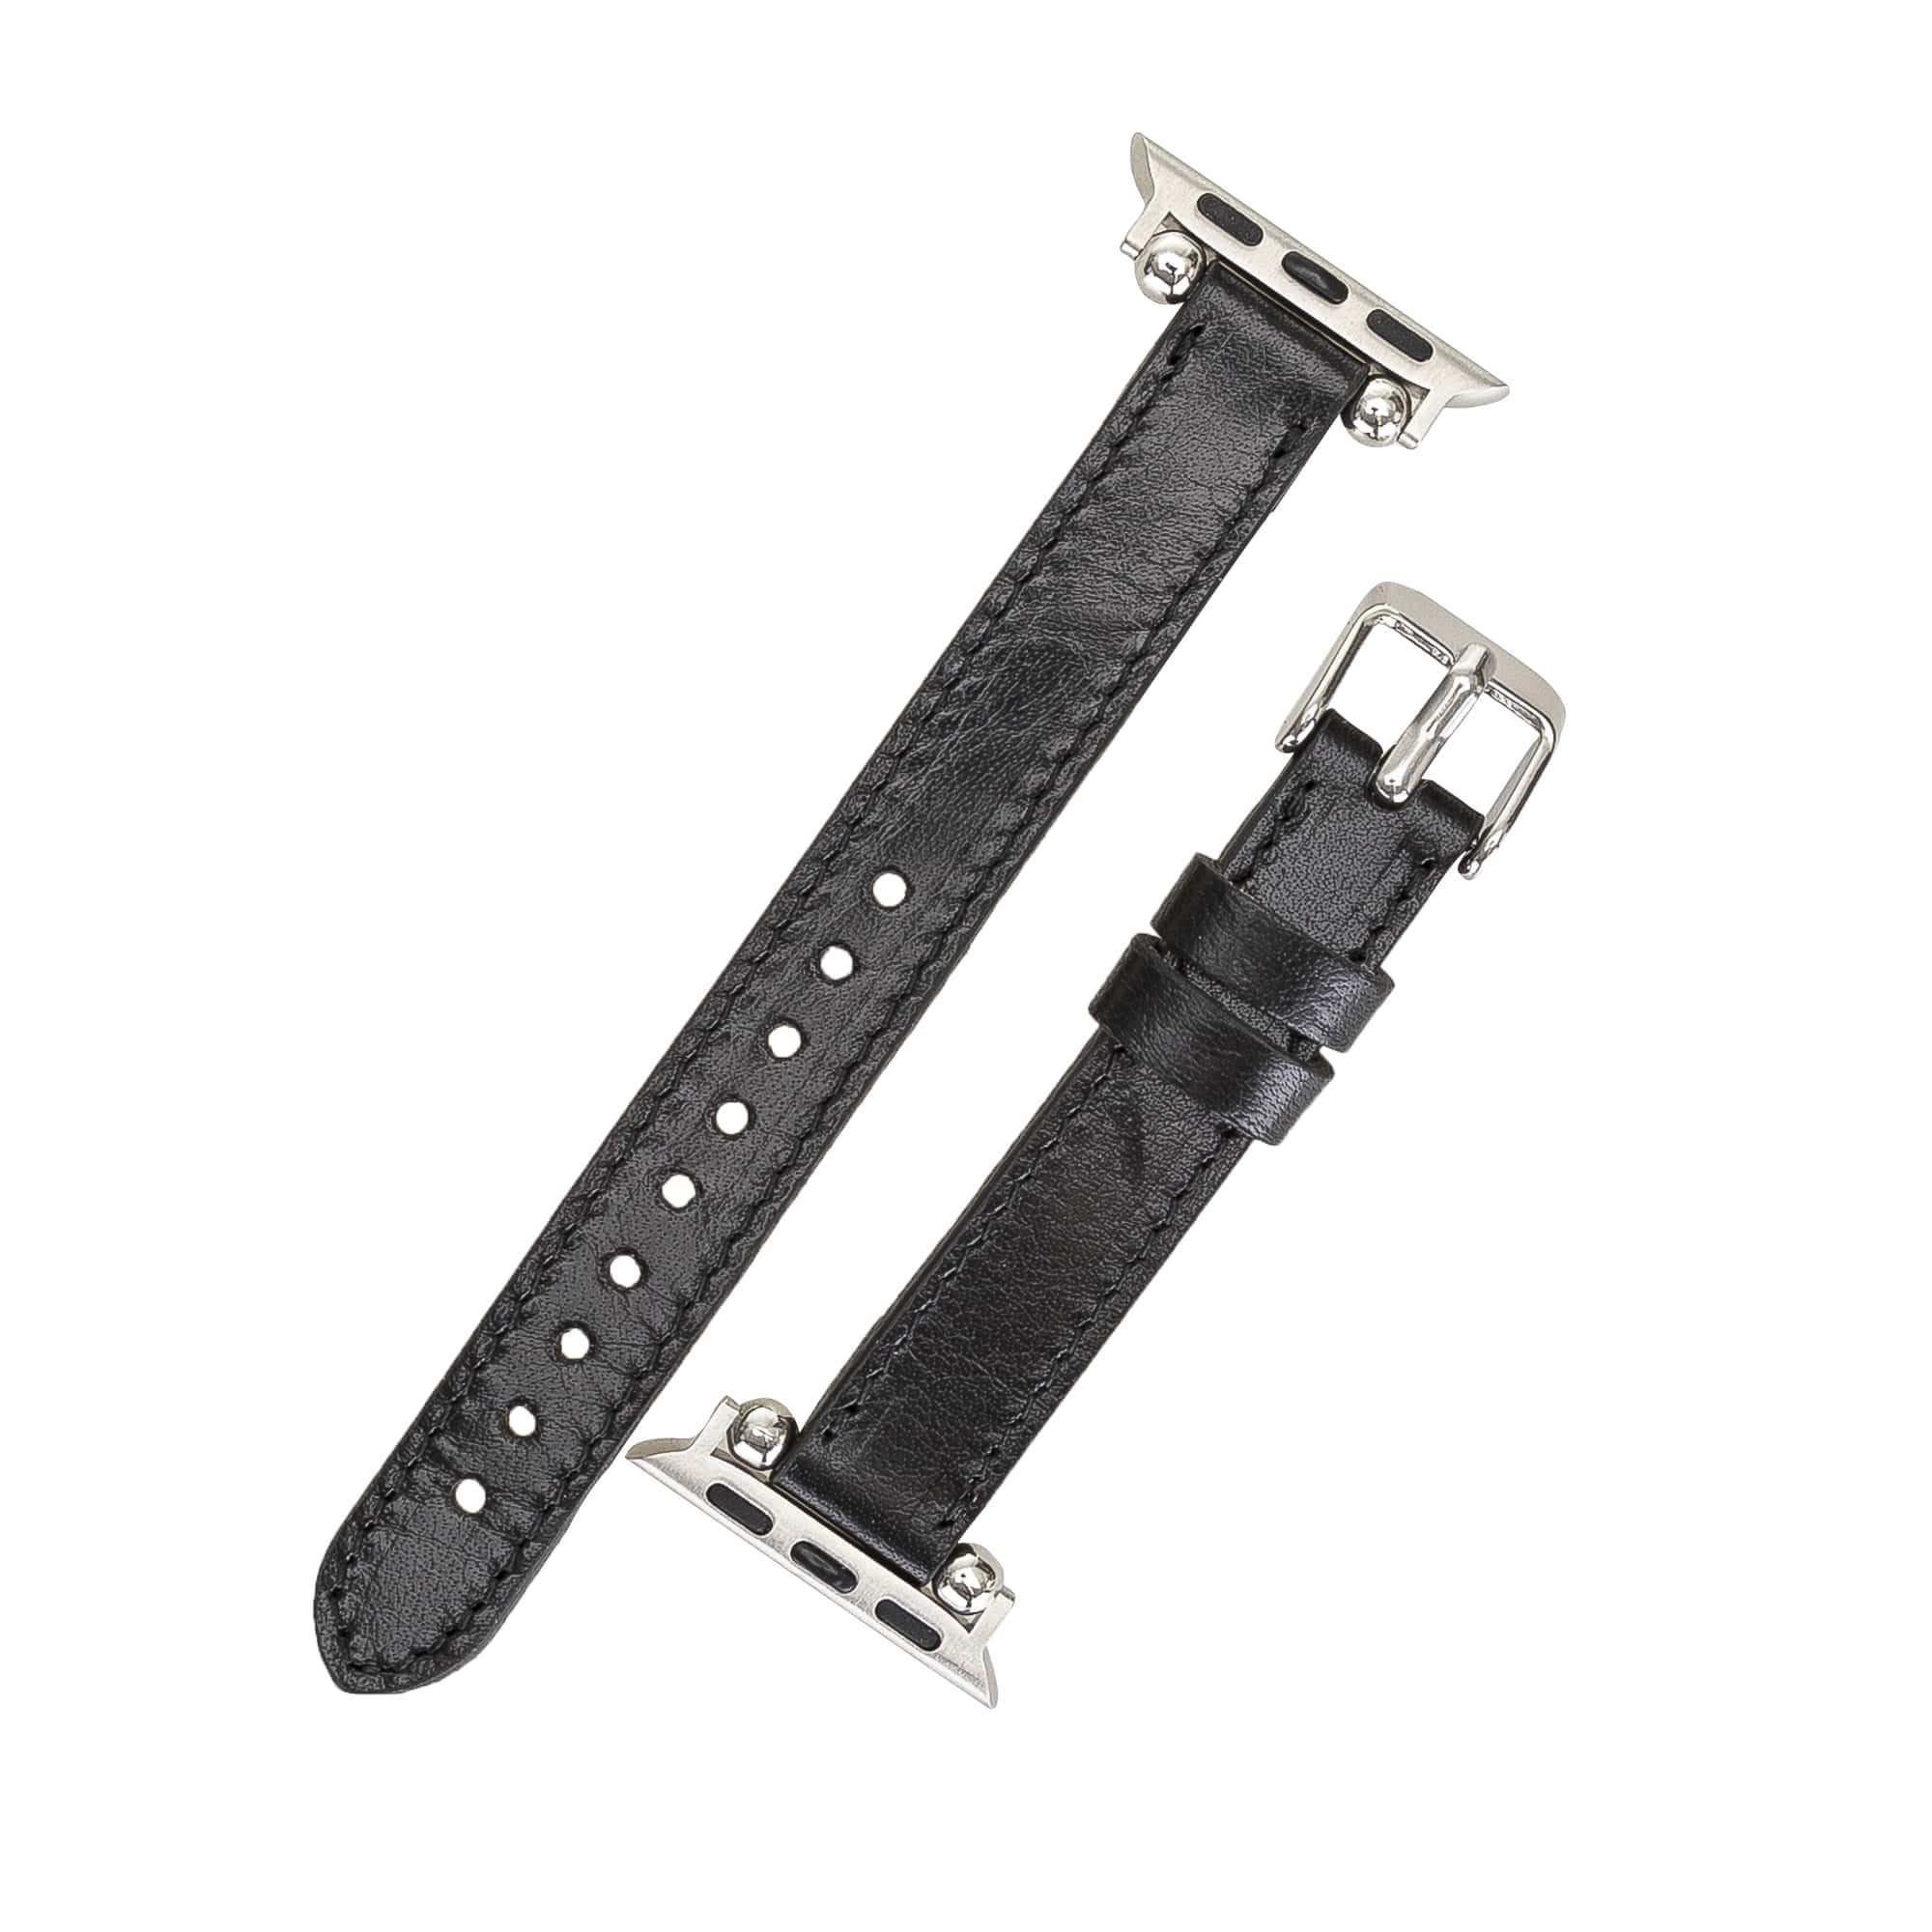 Sussex Black Genuine Leather Apple Watch Band Strap 38mm 40mm 42mm 44mm 45mm for All Series - Bomonti - 4